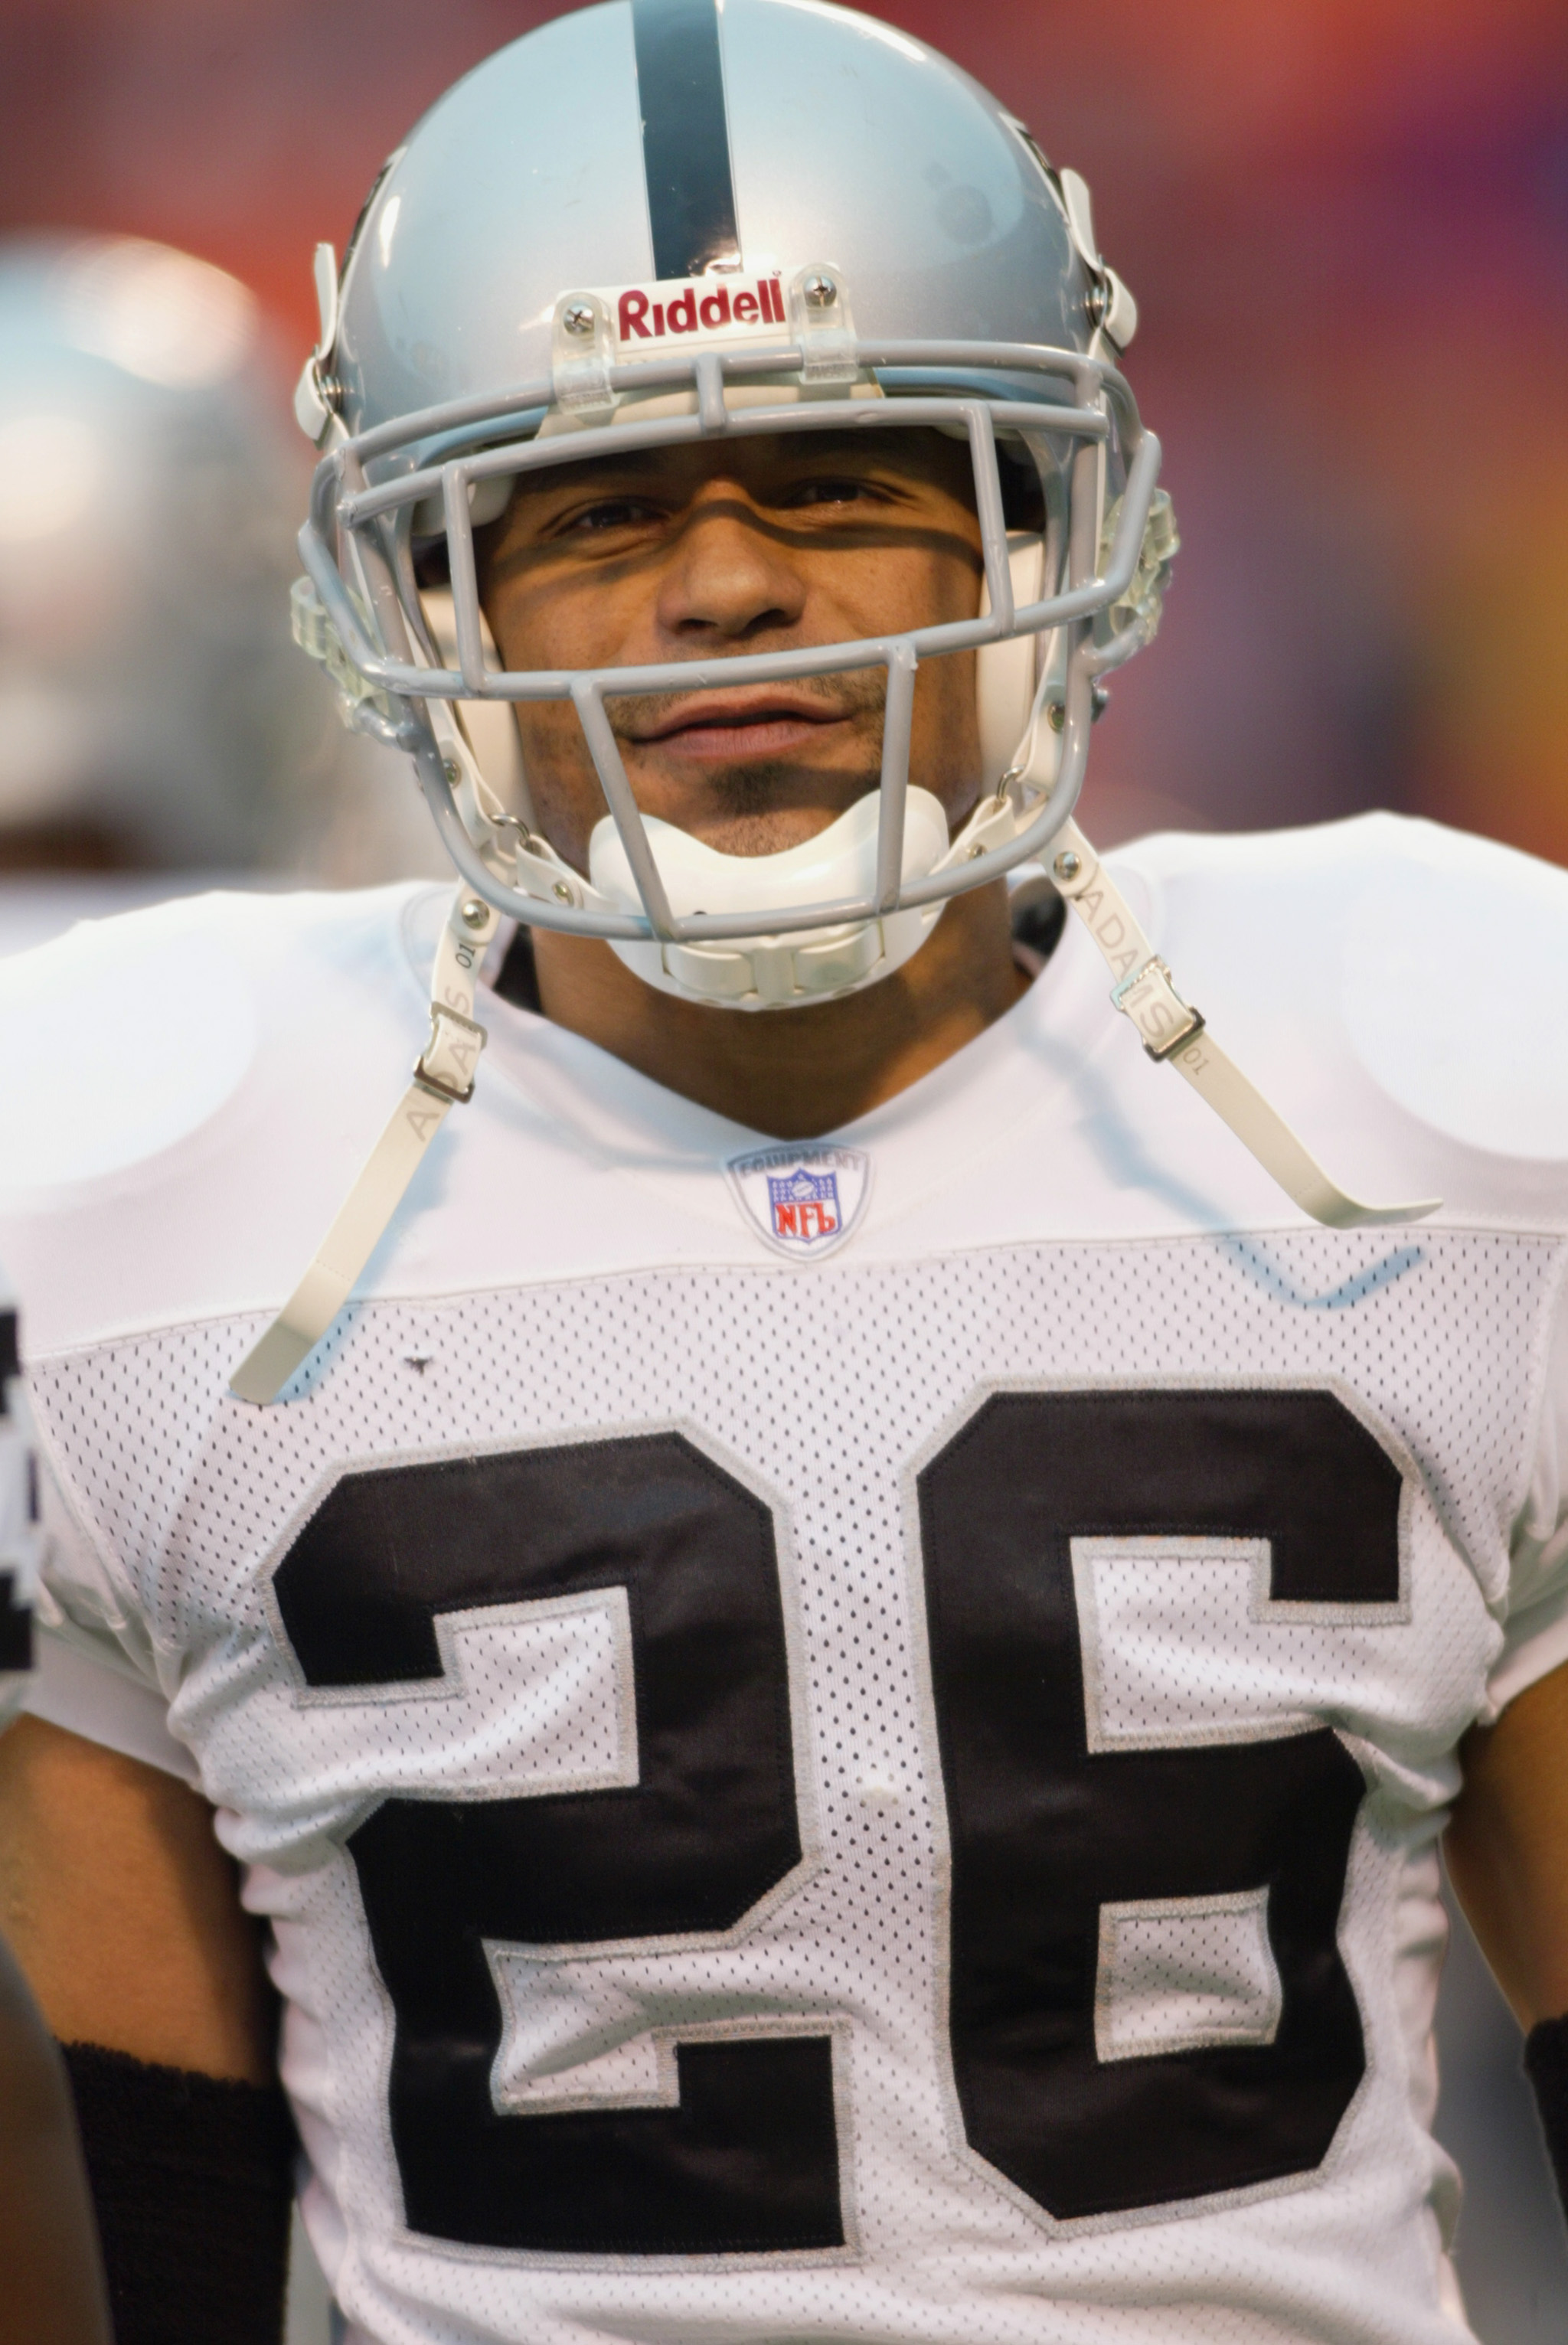 KANSAS CITY, MO - NOVEMBER 23:  Rod Woodson #26 of the Oakland Raiders looks on before the game against the Kansas City Chiefs on November 23, 2003 at Arrowhead Stadium in Kansas City, Missouri.  The Chiefs defeated the Raiders 27-24.  (Photo by Jamie Squ